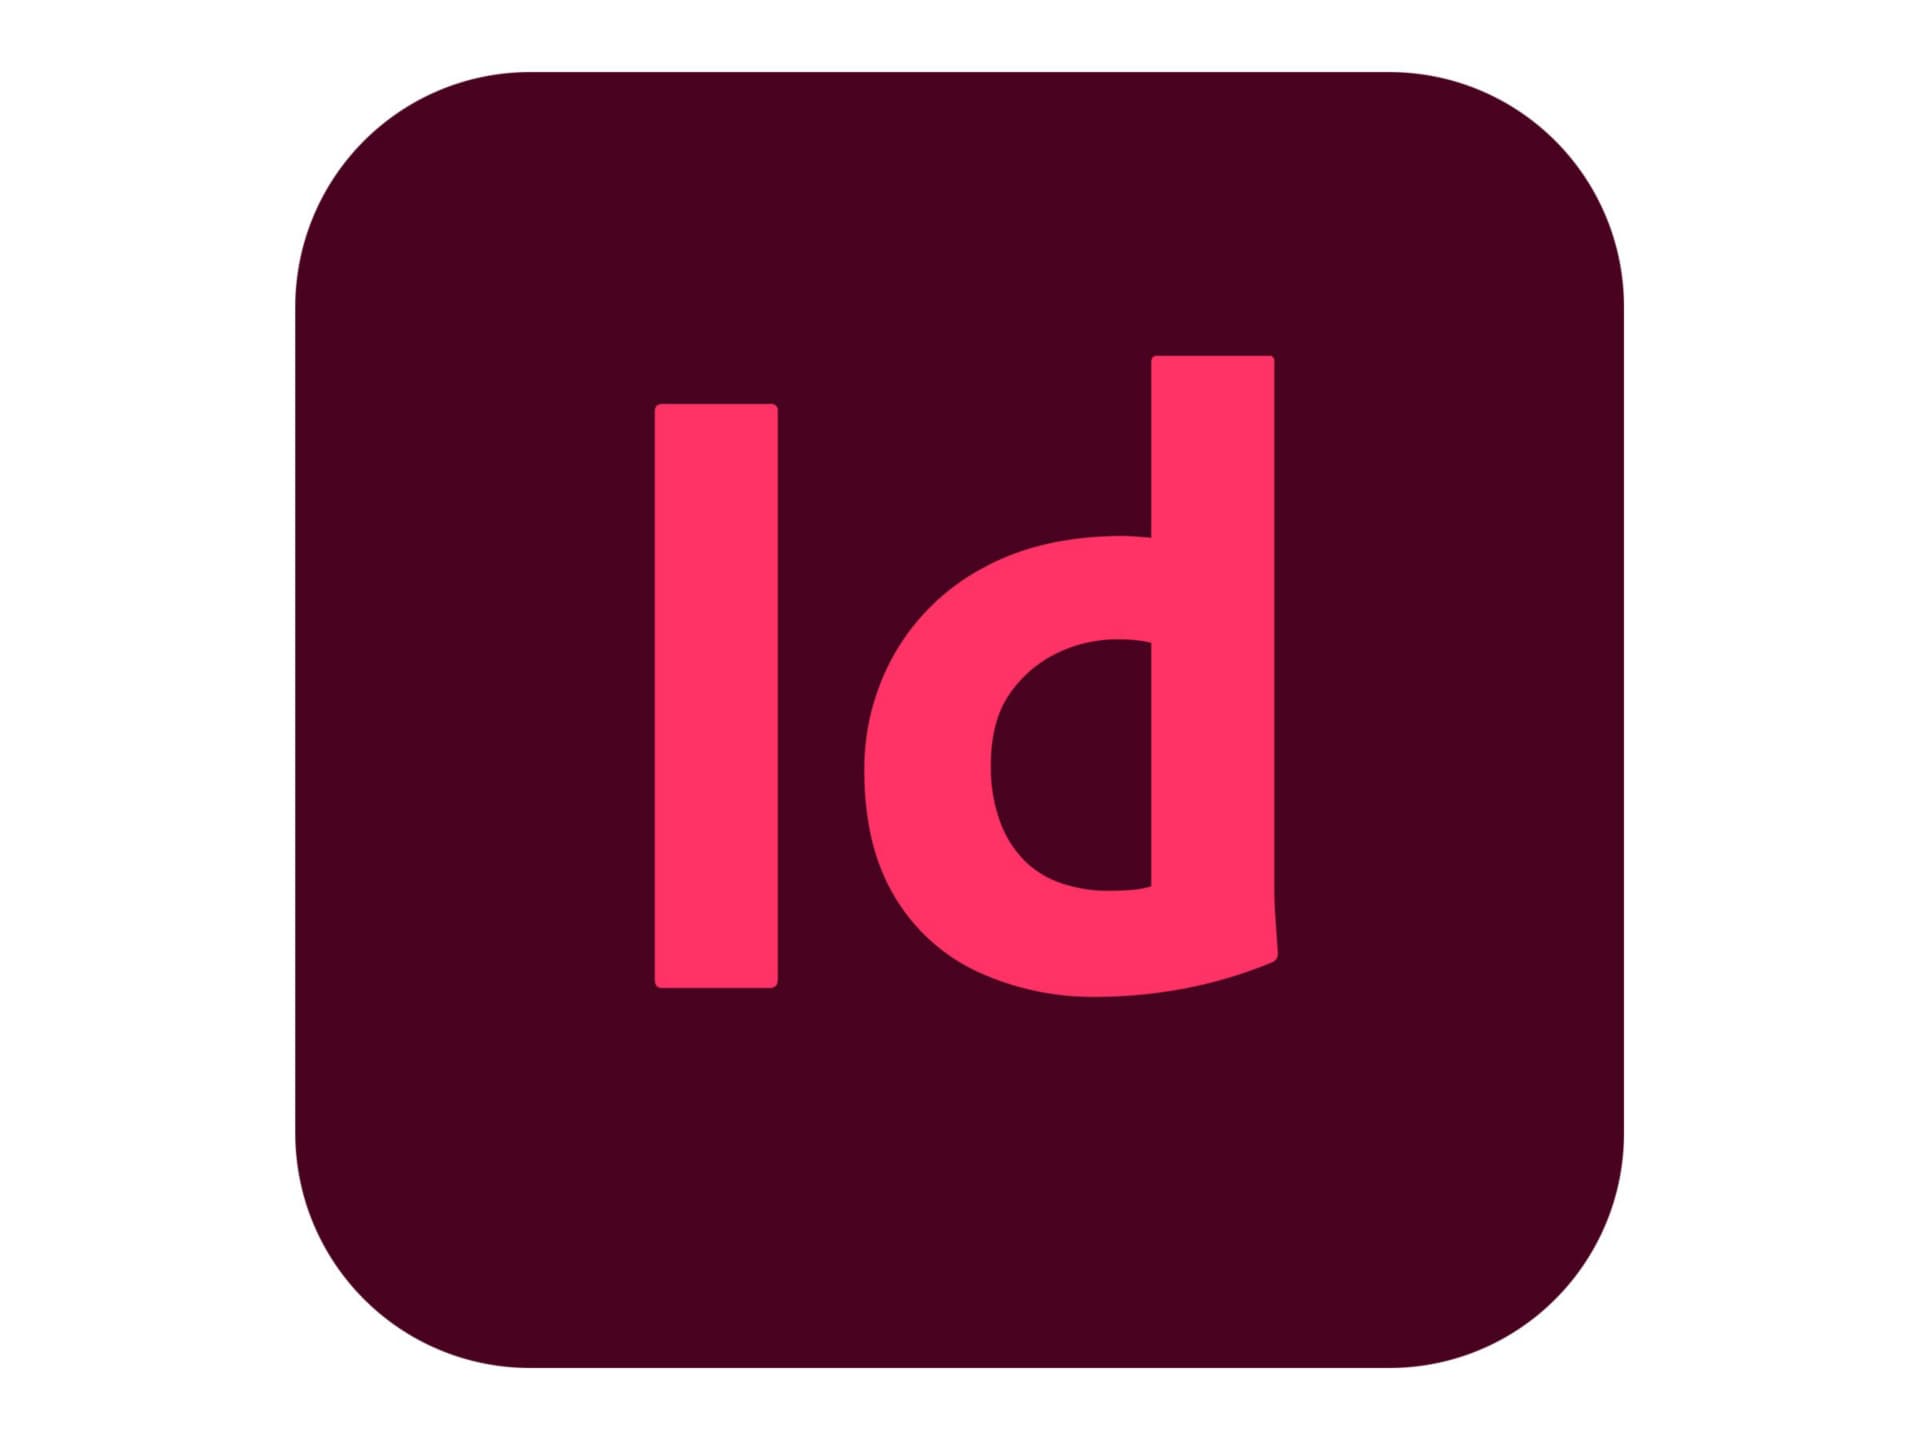 Adobe InDesign for teams - Subscription New (annual) - 1 user